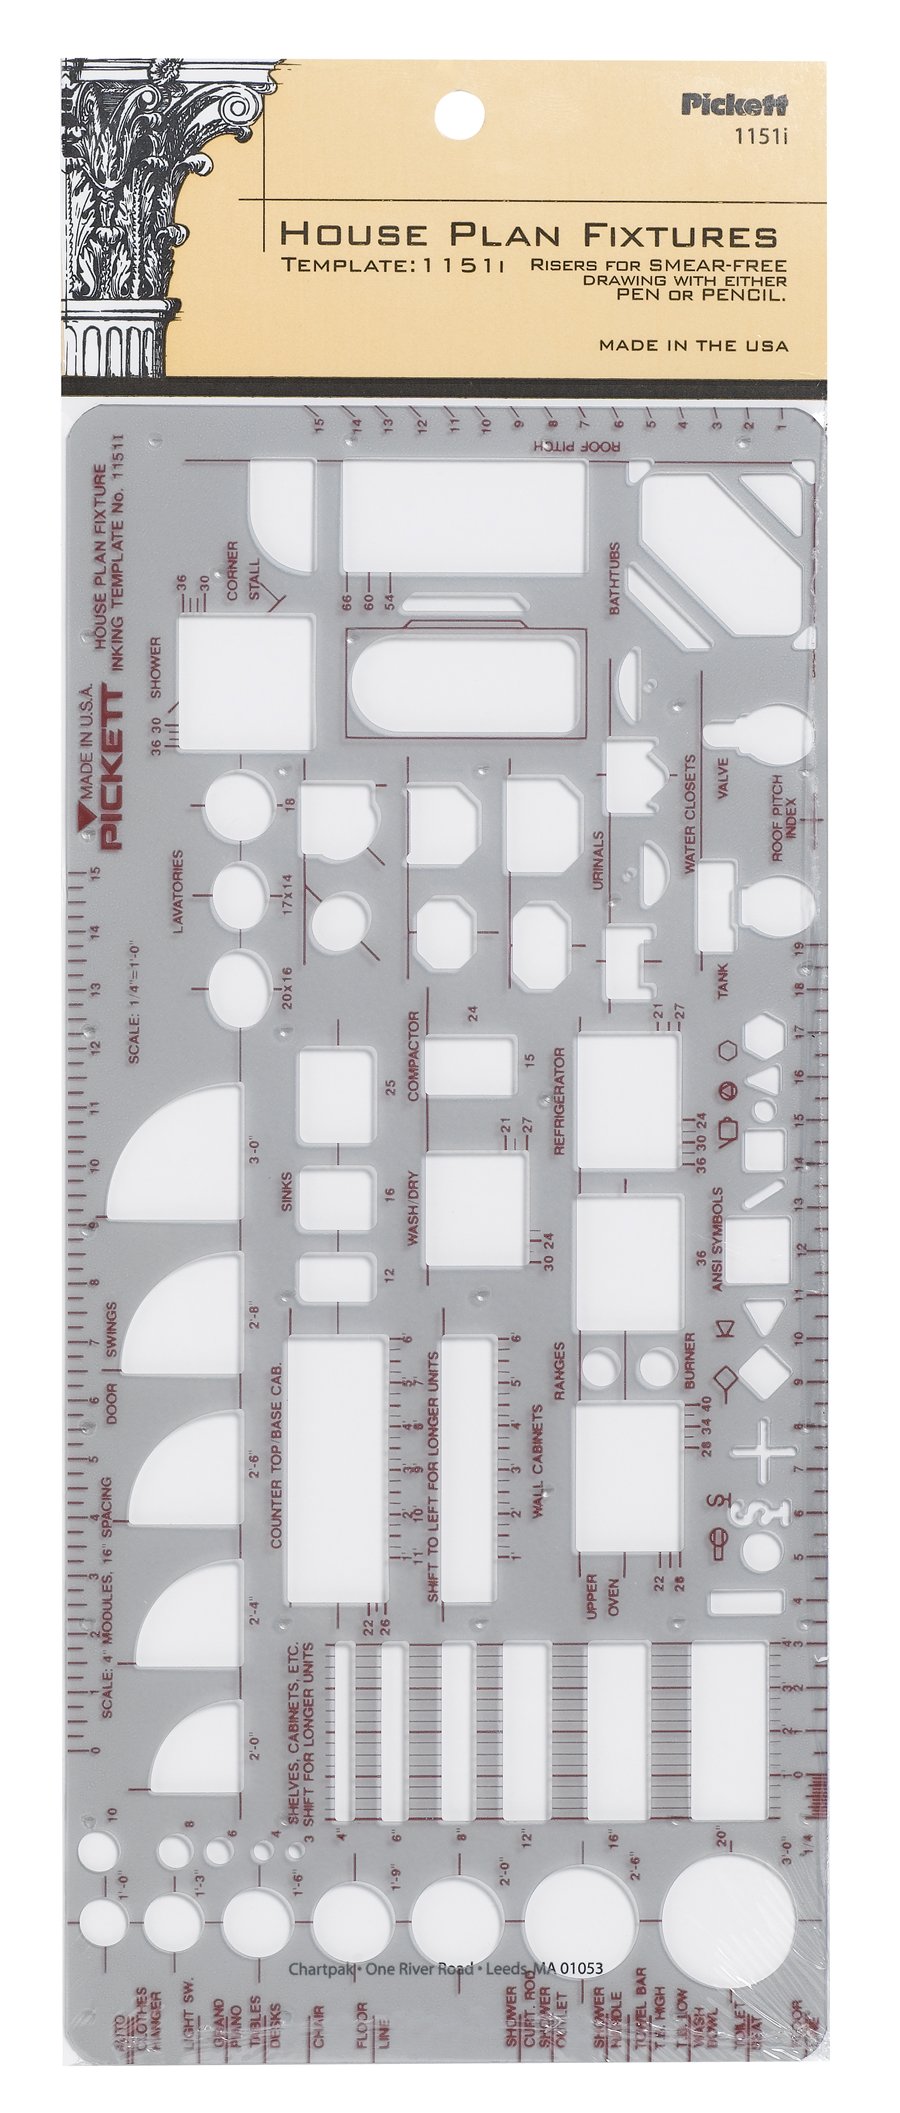 Pickett House Plan Fixtures Kitchen and Bath Template, 1/4 Inch Scale (1151I)